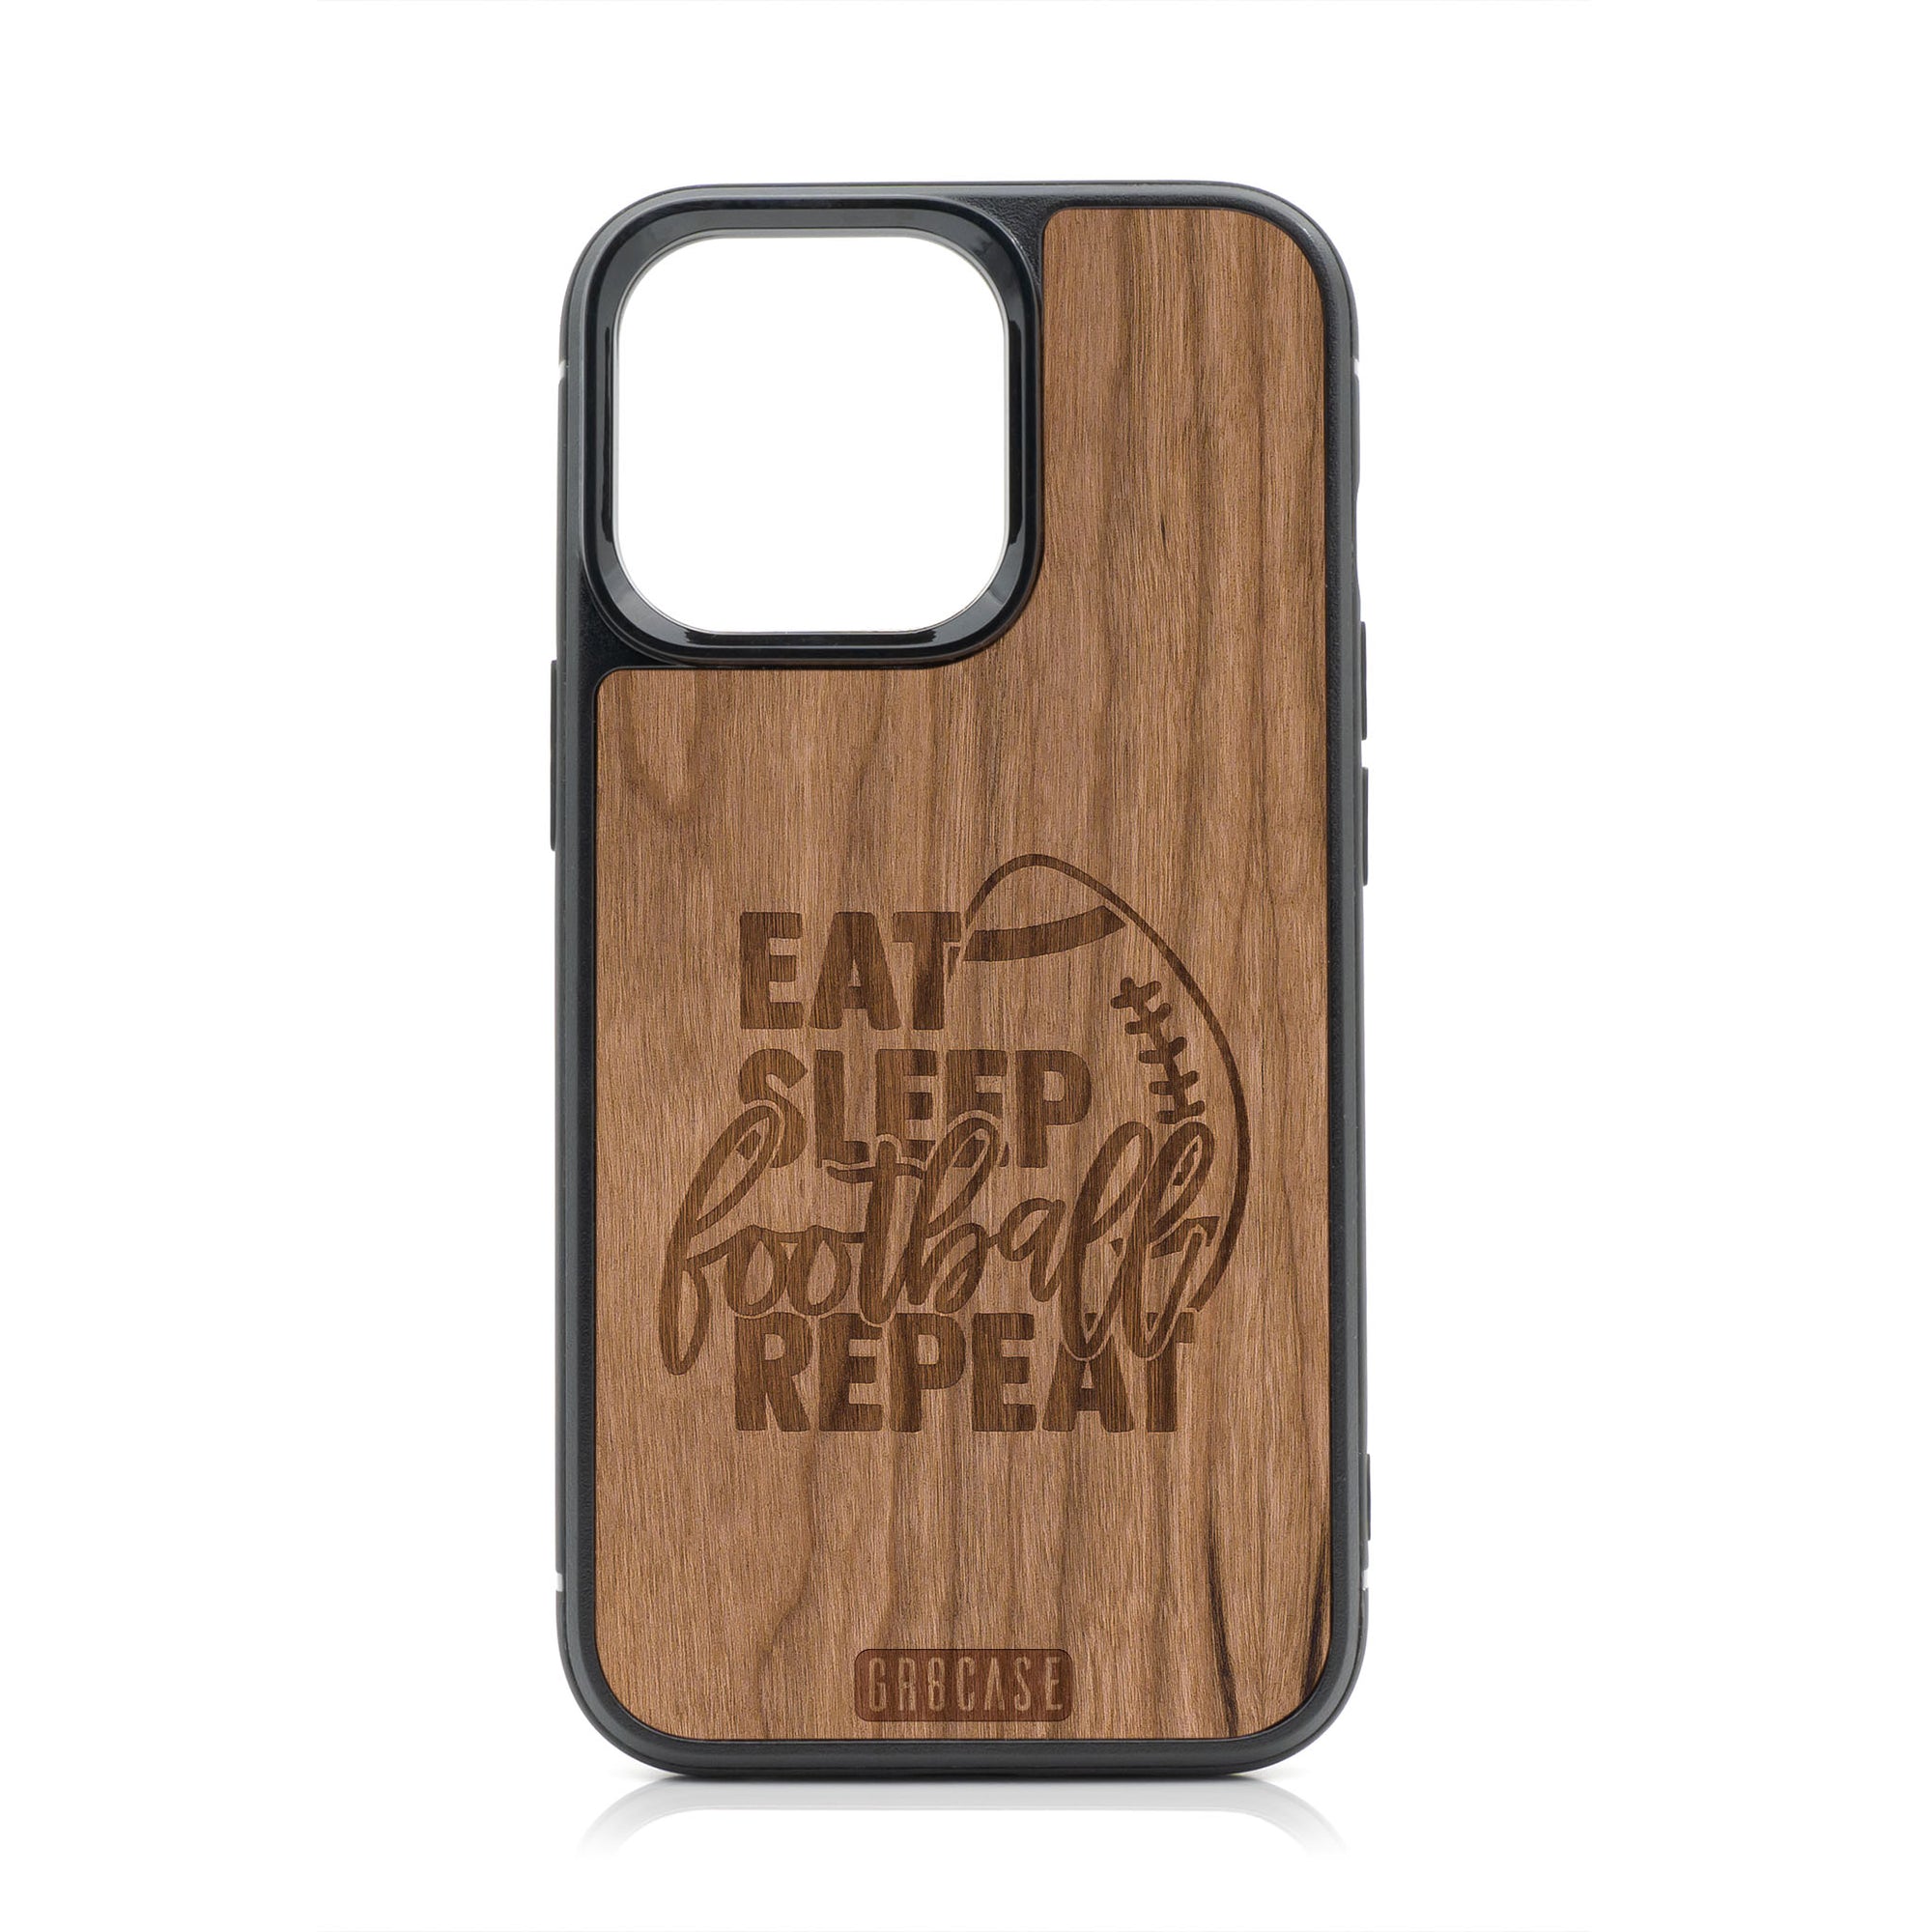 Eat Sleep Football Repeat Design Wood Case For iPhone 13 Pro